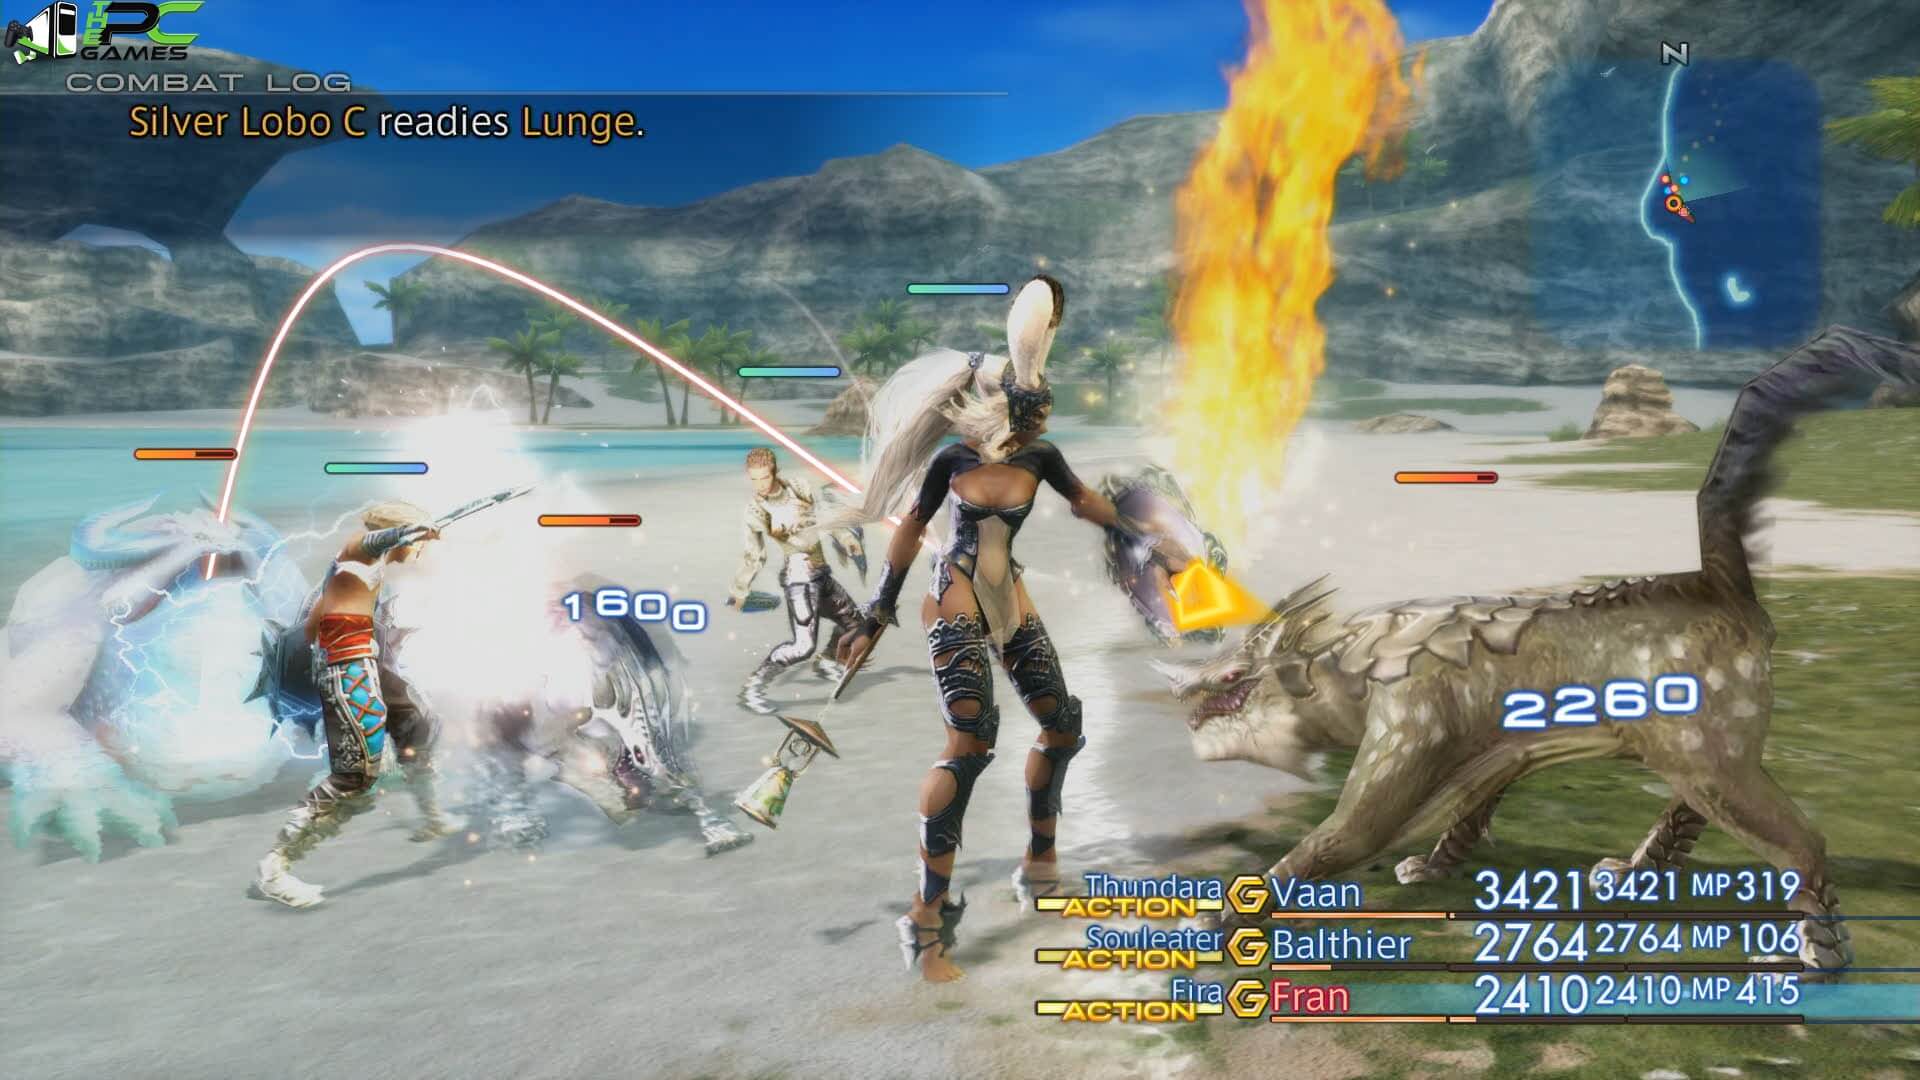 Final fantasy xii: the zodiac age download for mac